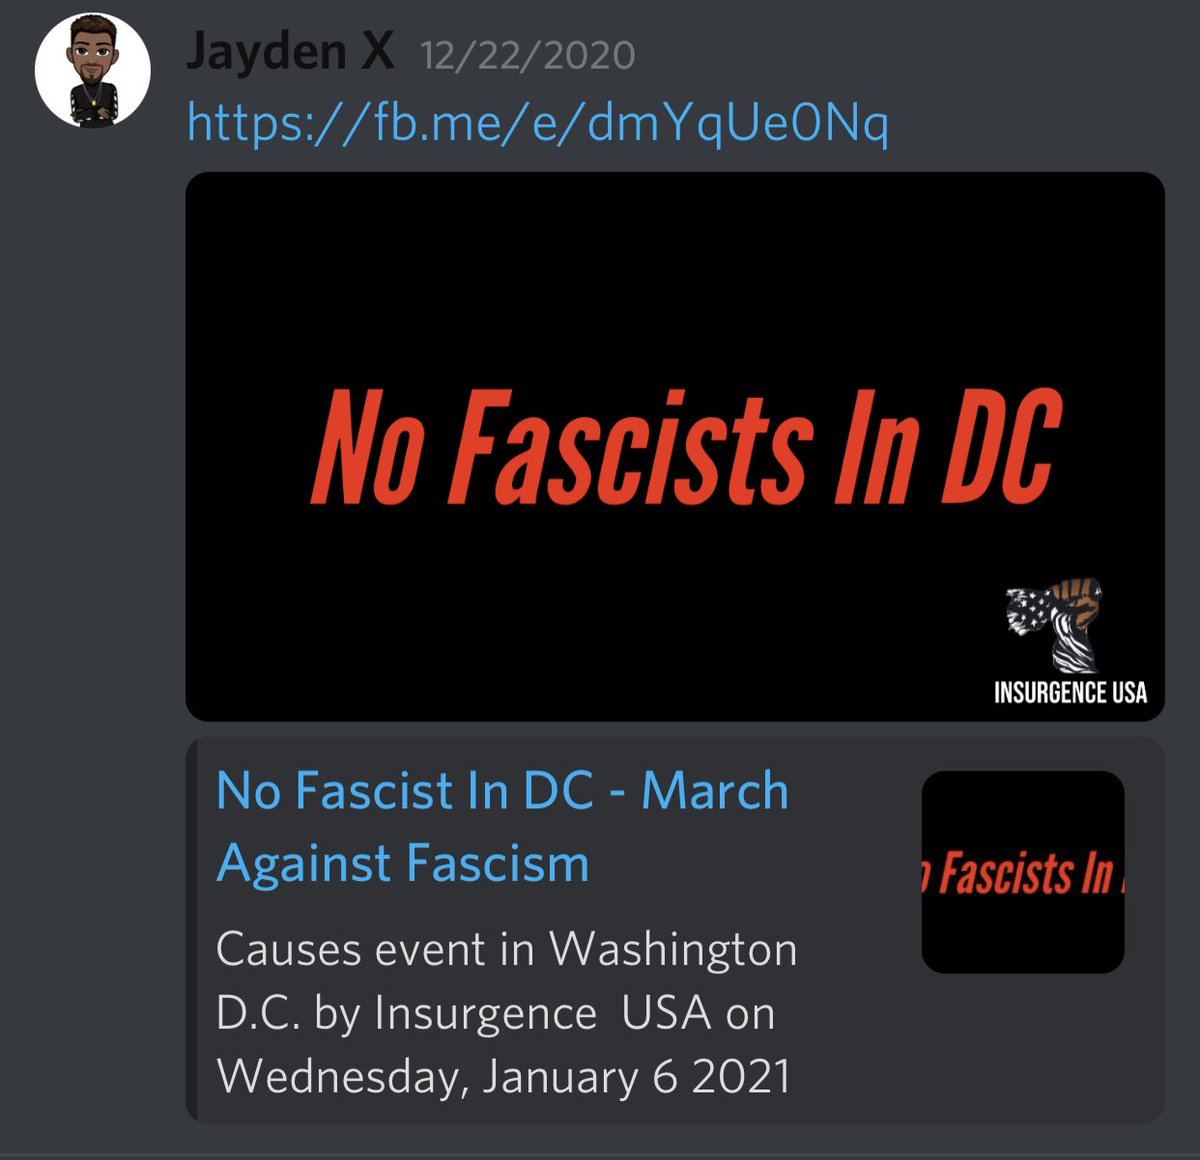 Another Antifa event in DC on January 6. Link does not work anymore.